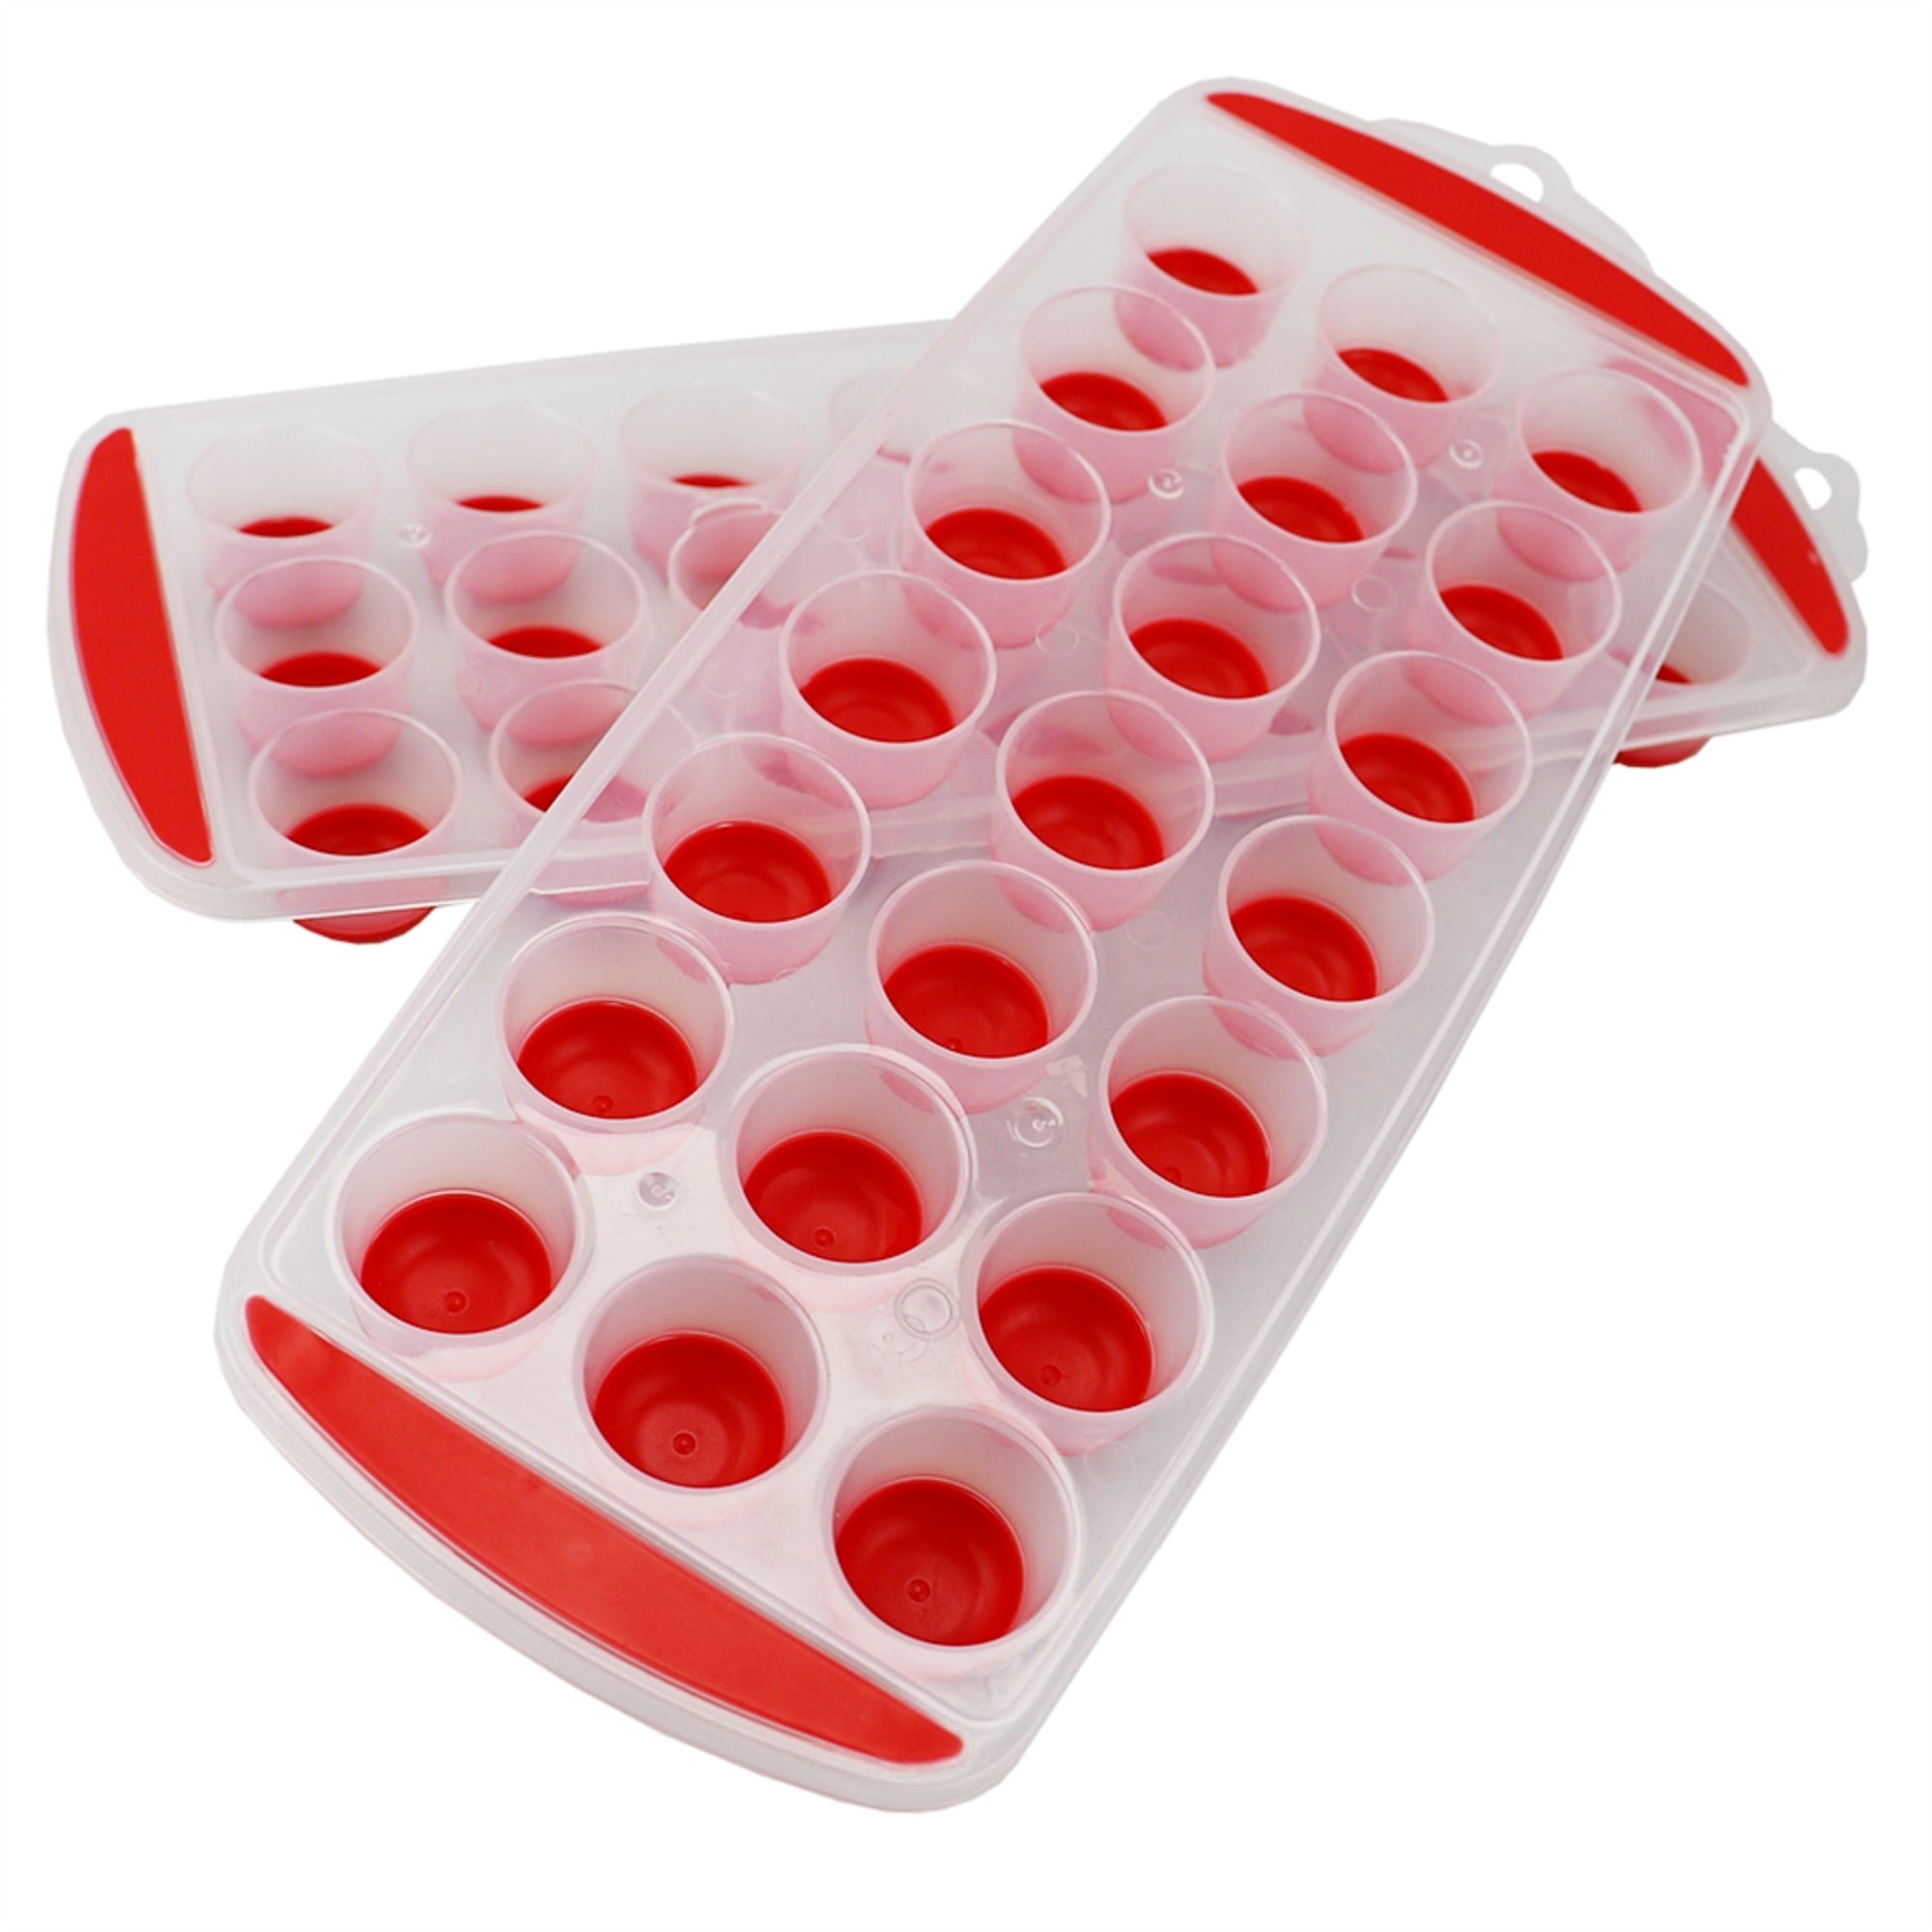 Red Silicone Pop-Out Ice Cube Tray, 2-Pack